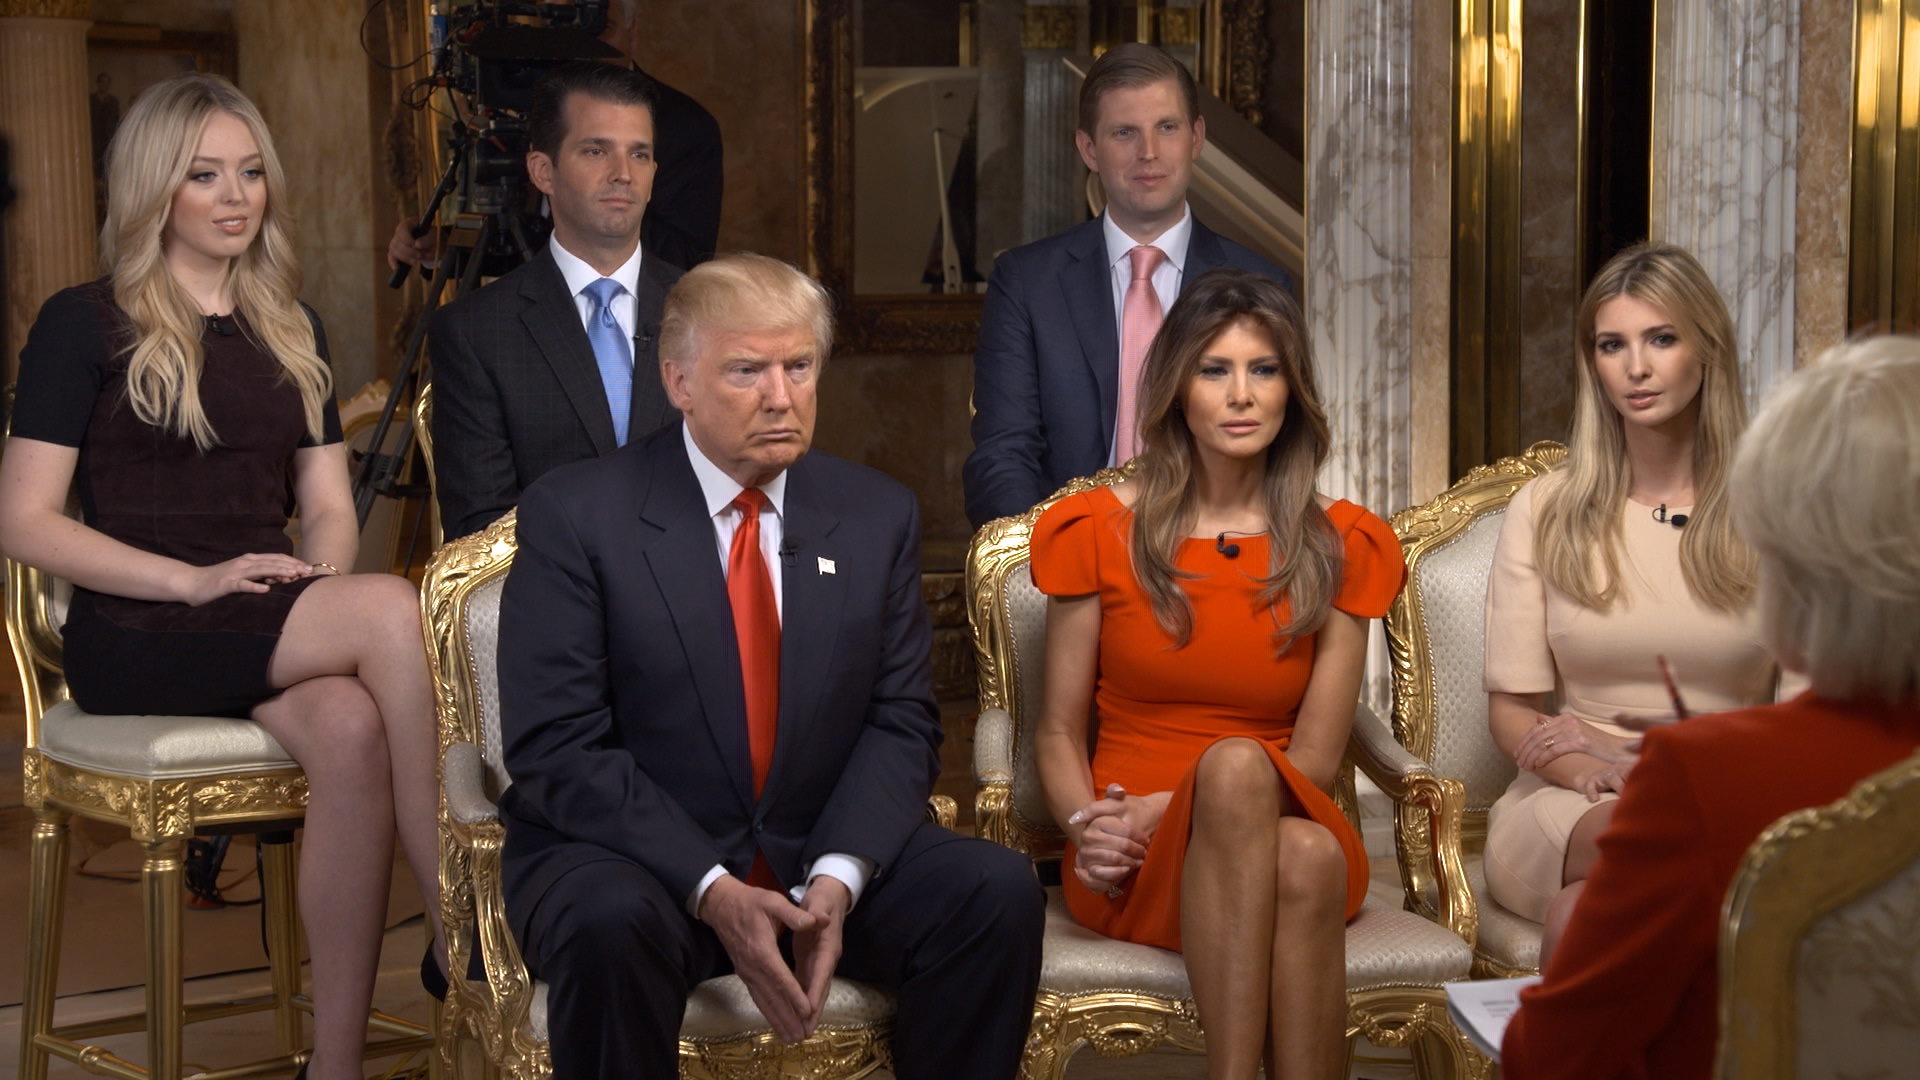 <i>60 Minutes</i> Correspondent Lesley Stahl interviews President-elect Donald J. Trump and his family shown here from left: Tiffany Trump, Donald Trump, Jr., Donald Trump, Eric Trump, Melania Trump, Ivanka Trump at his Manhattan home on November 11. (CBS Photo Archive—Getty Images)